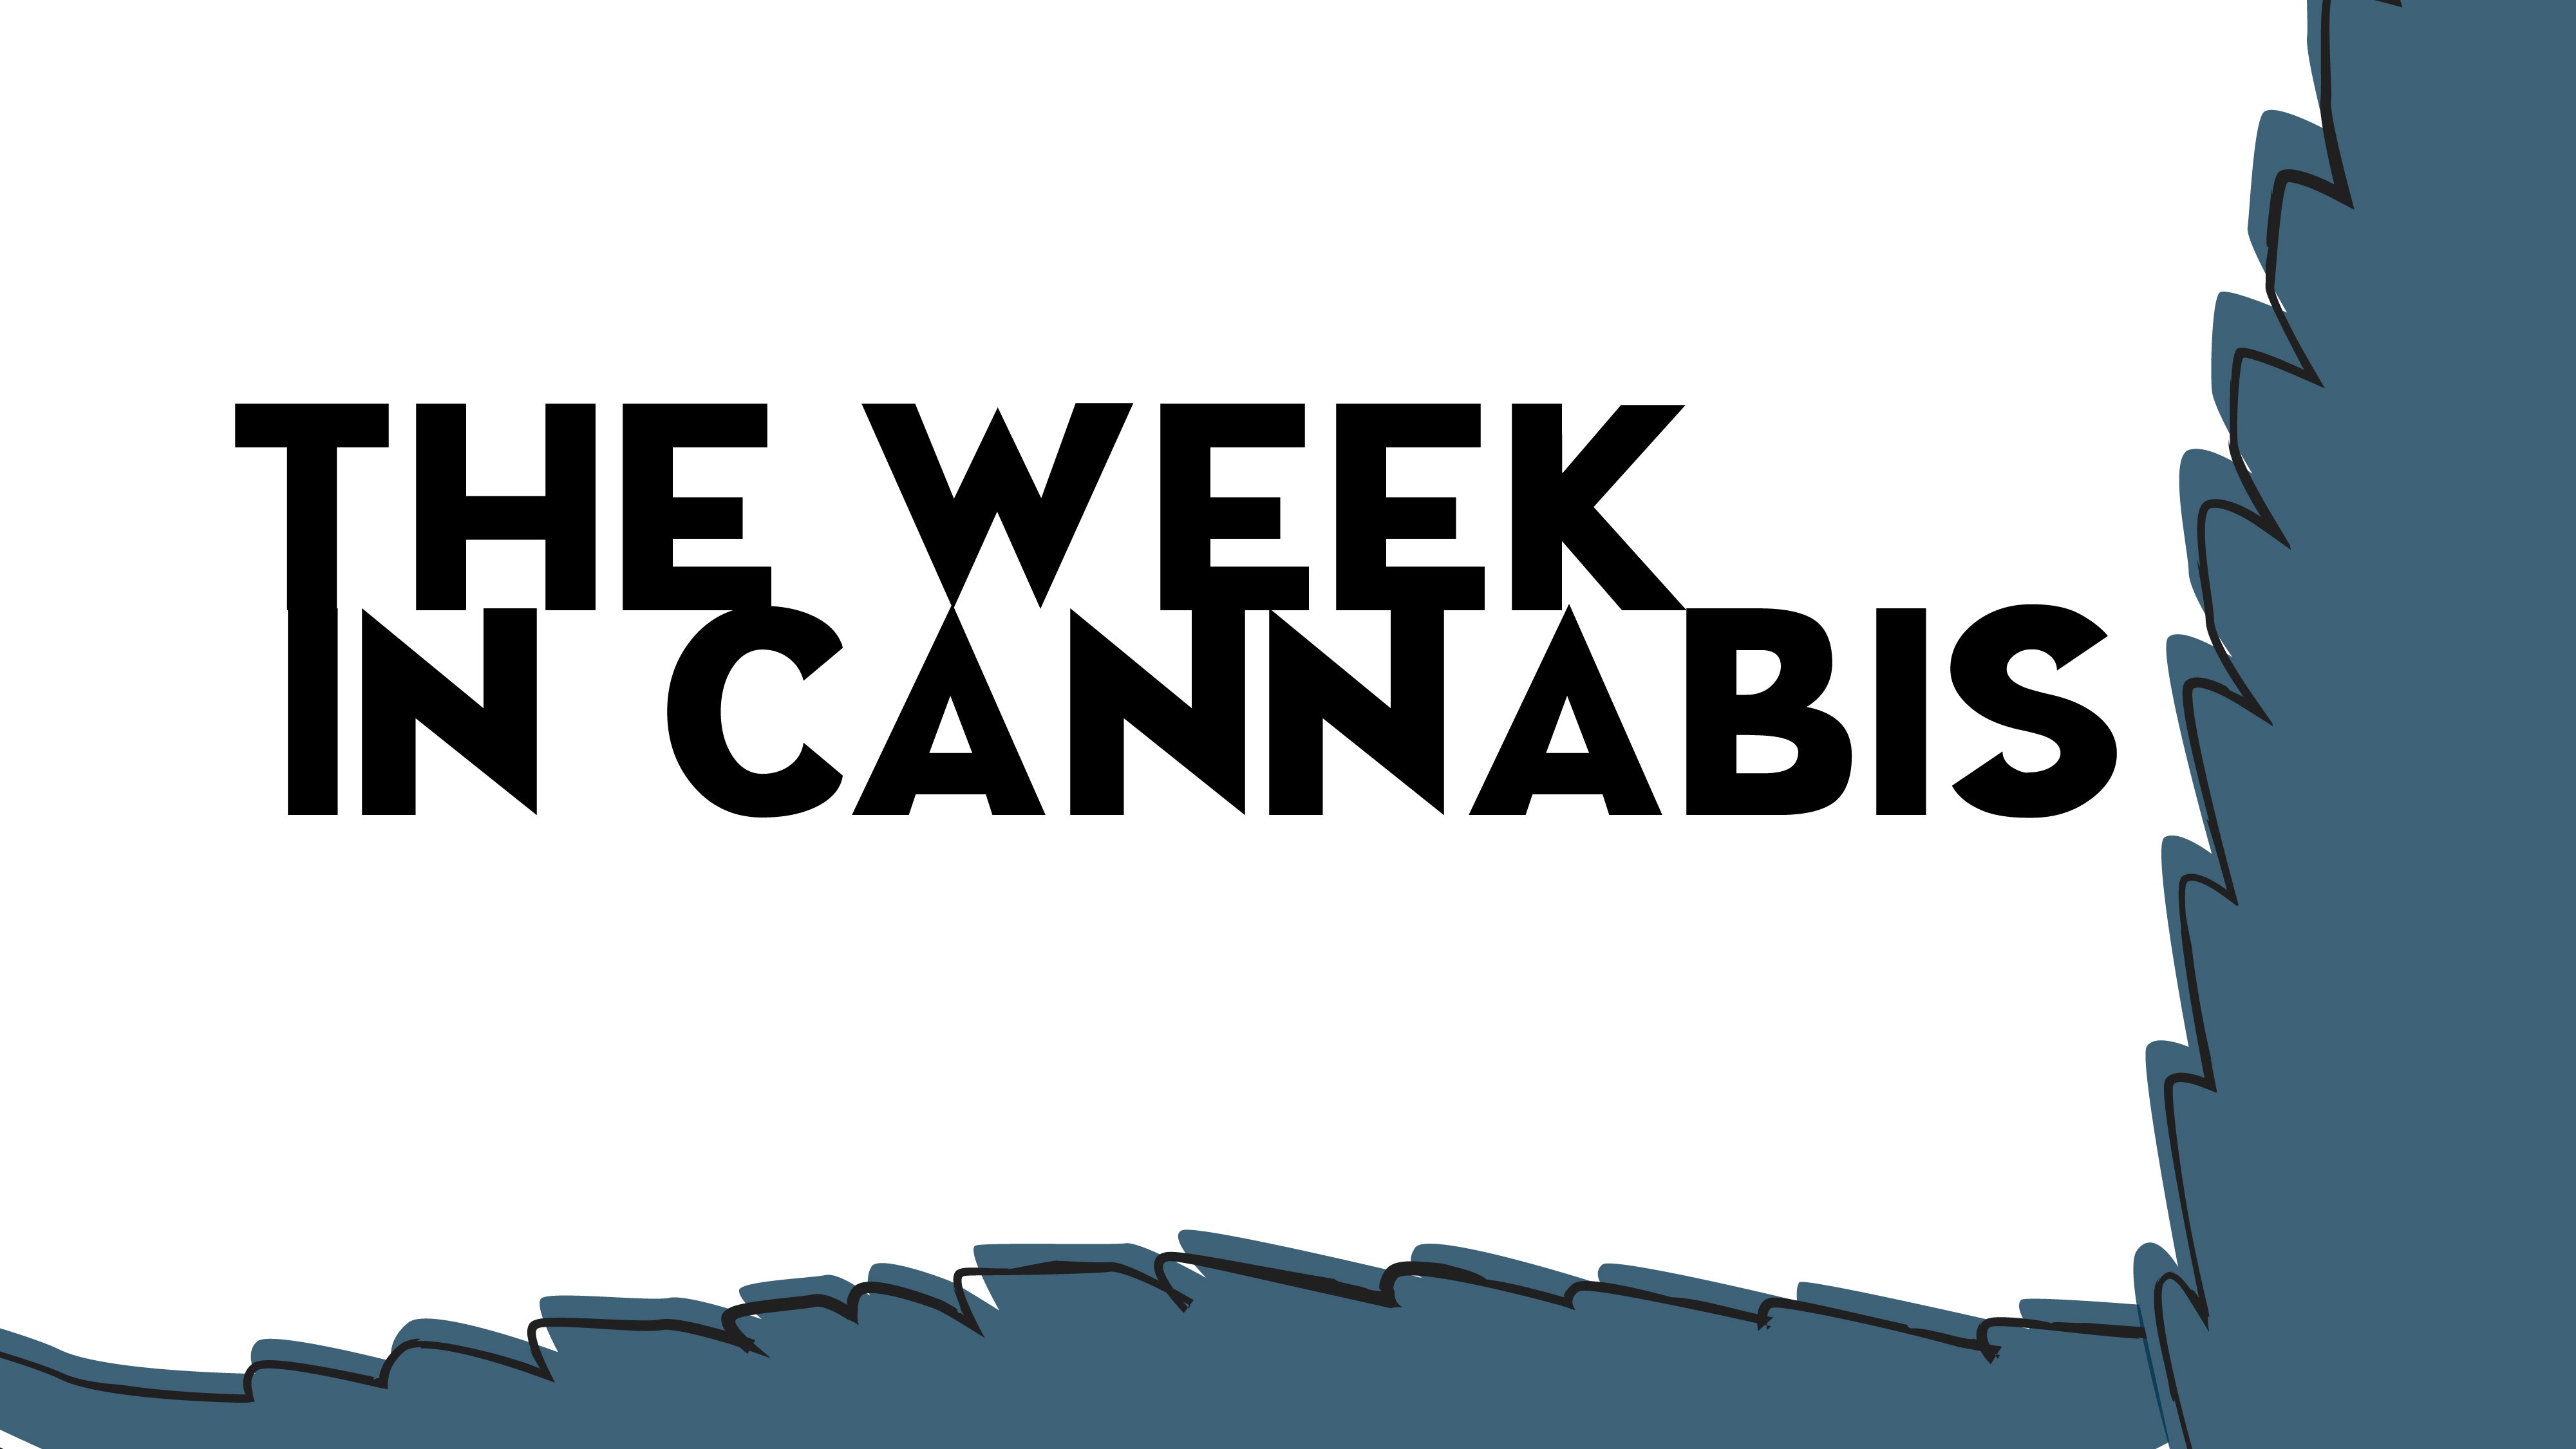 The Week In Cannabis: FDA, CDC, Delta-8 THC, WADA, Canopy, Sundial, Canada, LatAm And More